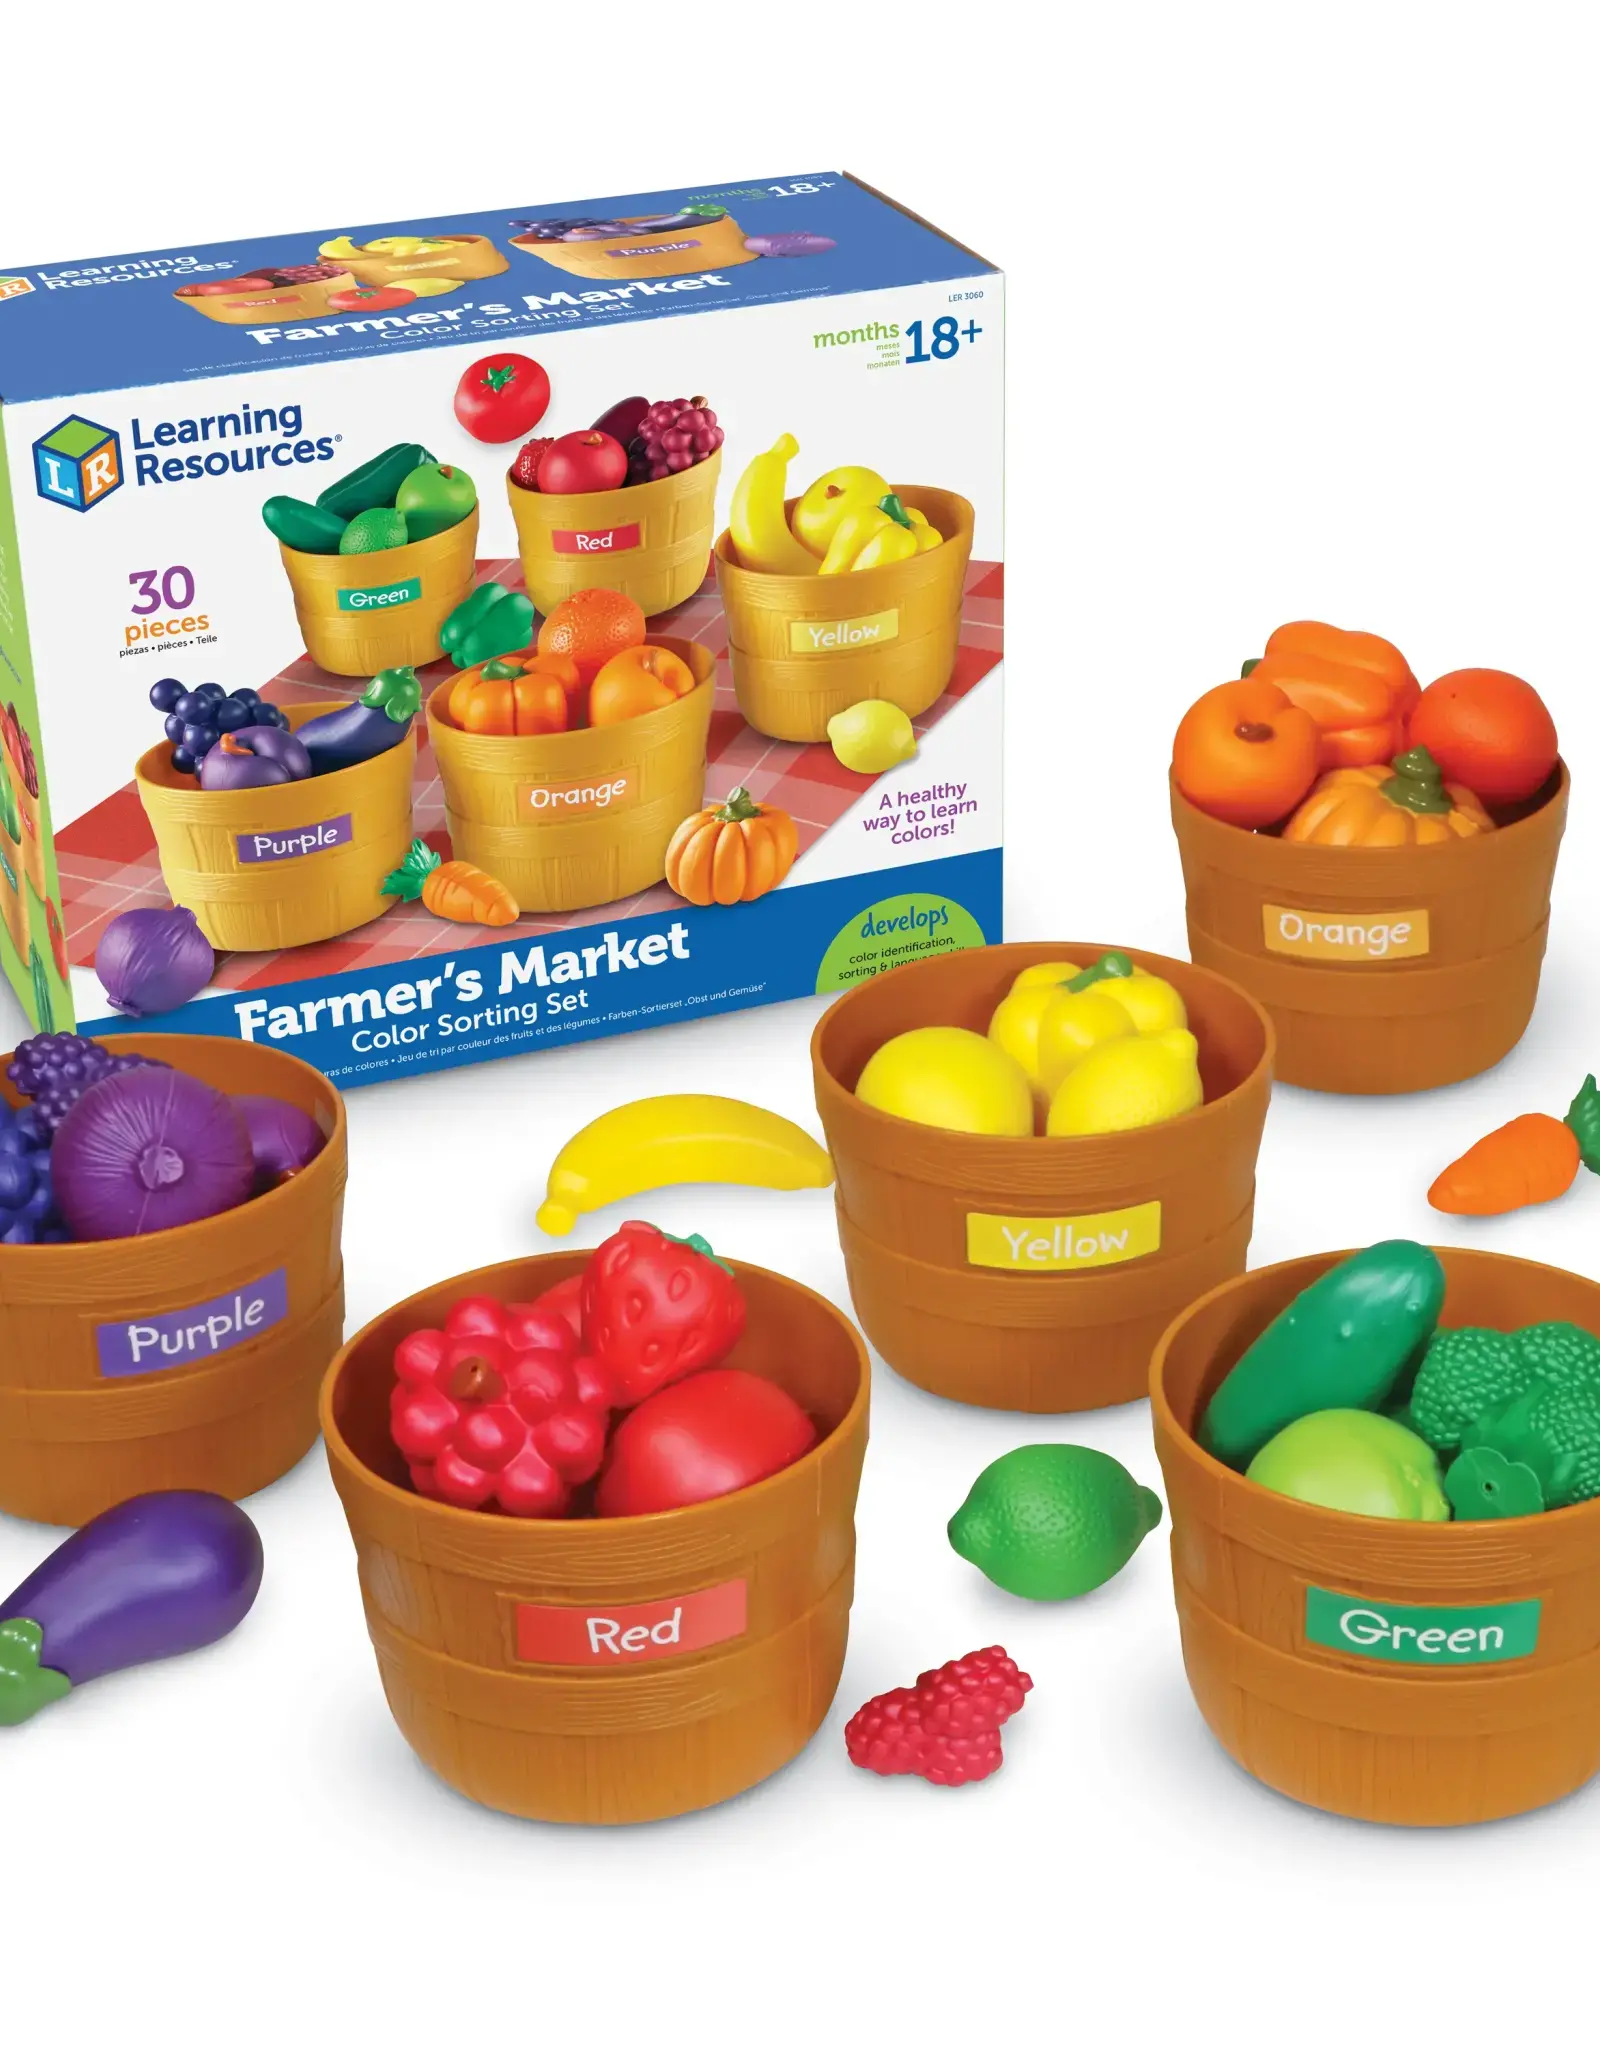 LEARNING RESOURCES Farmer's Market Color Sorting Set